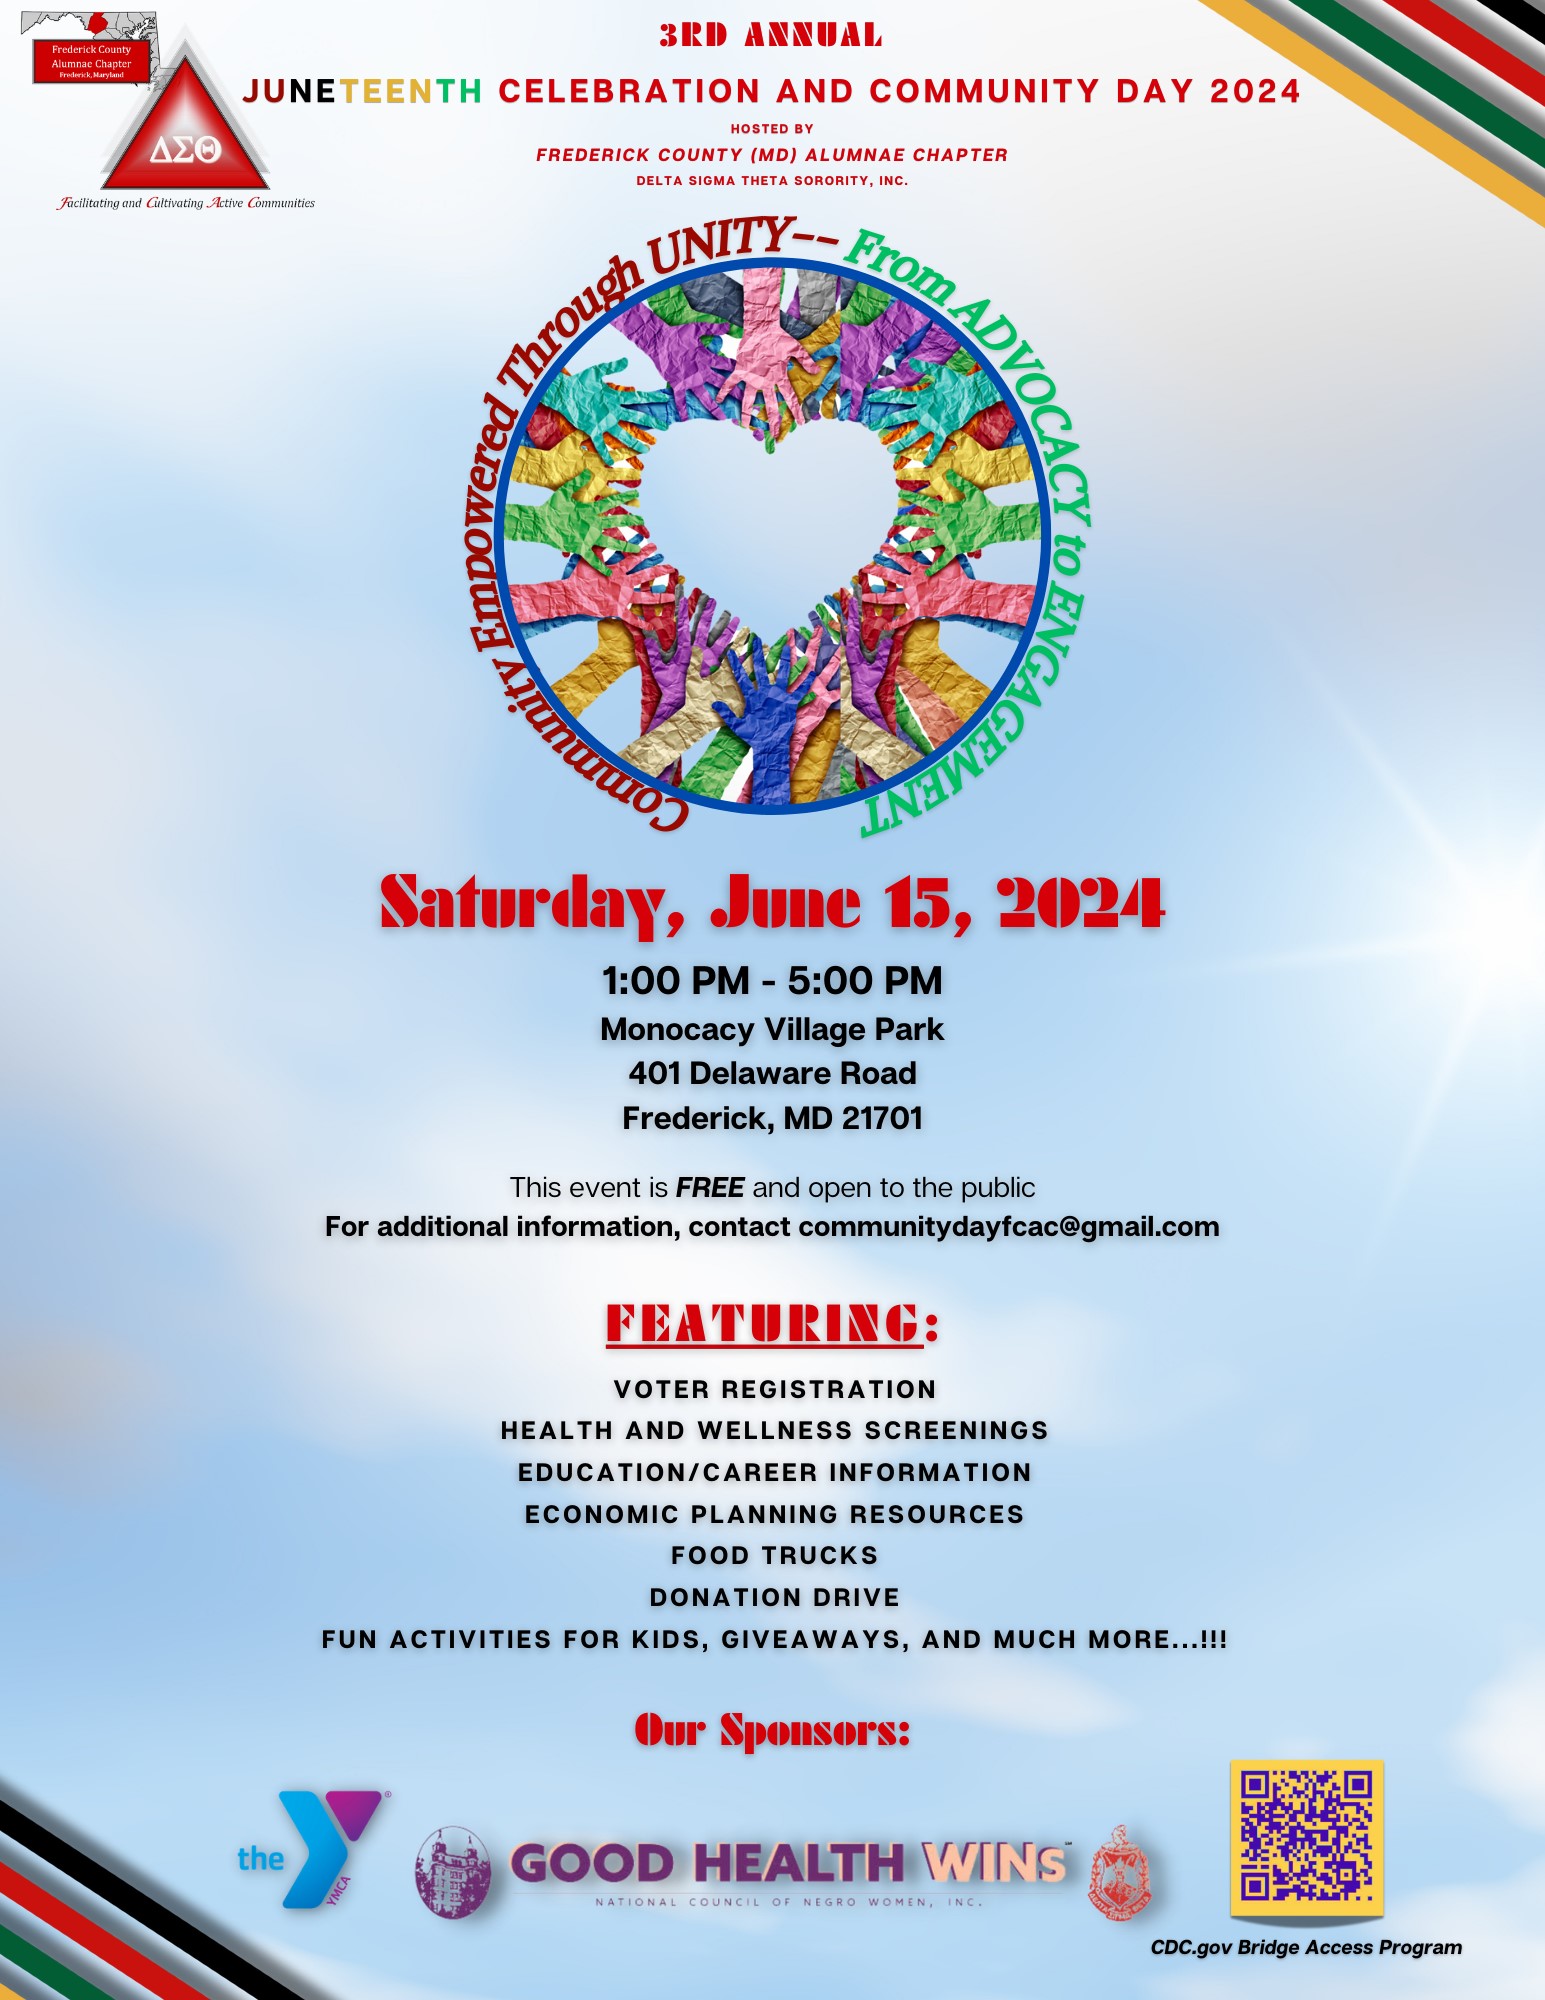 Delta Sigma Theta Sorority's 3rd Annual Community Day June 15, 2024, “Unity Through Community: From Advocacy to Engagement